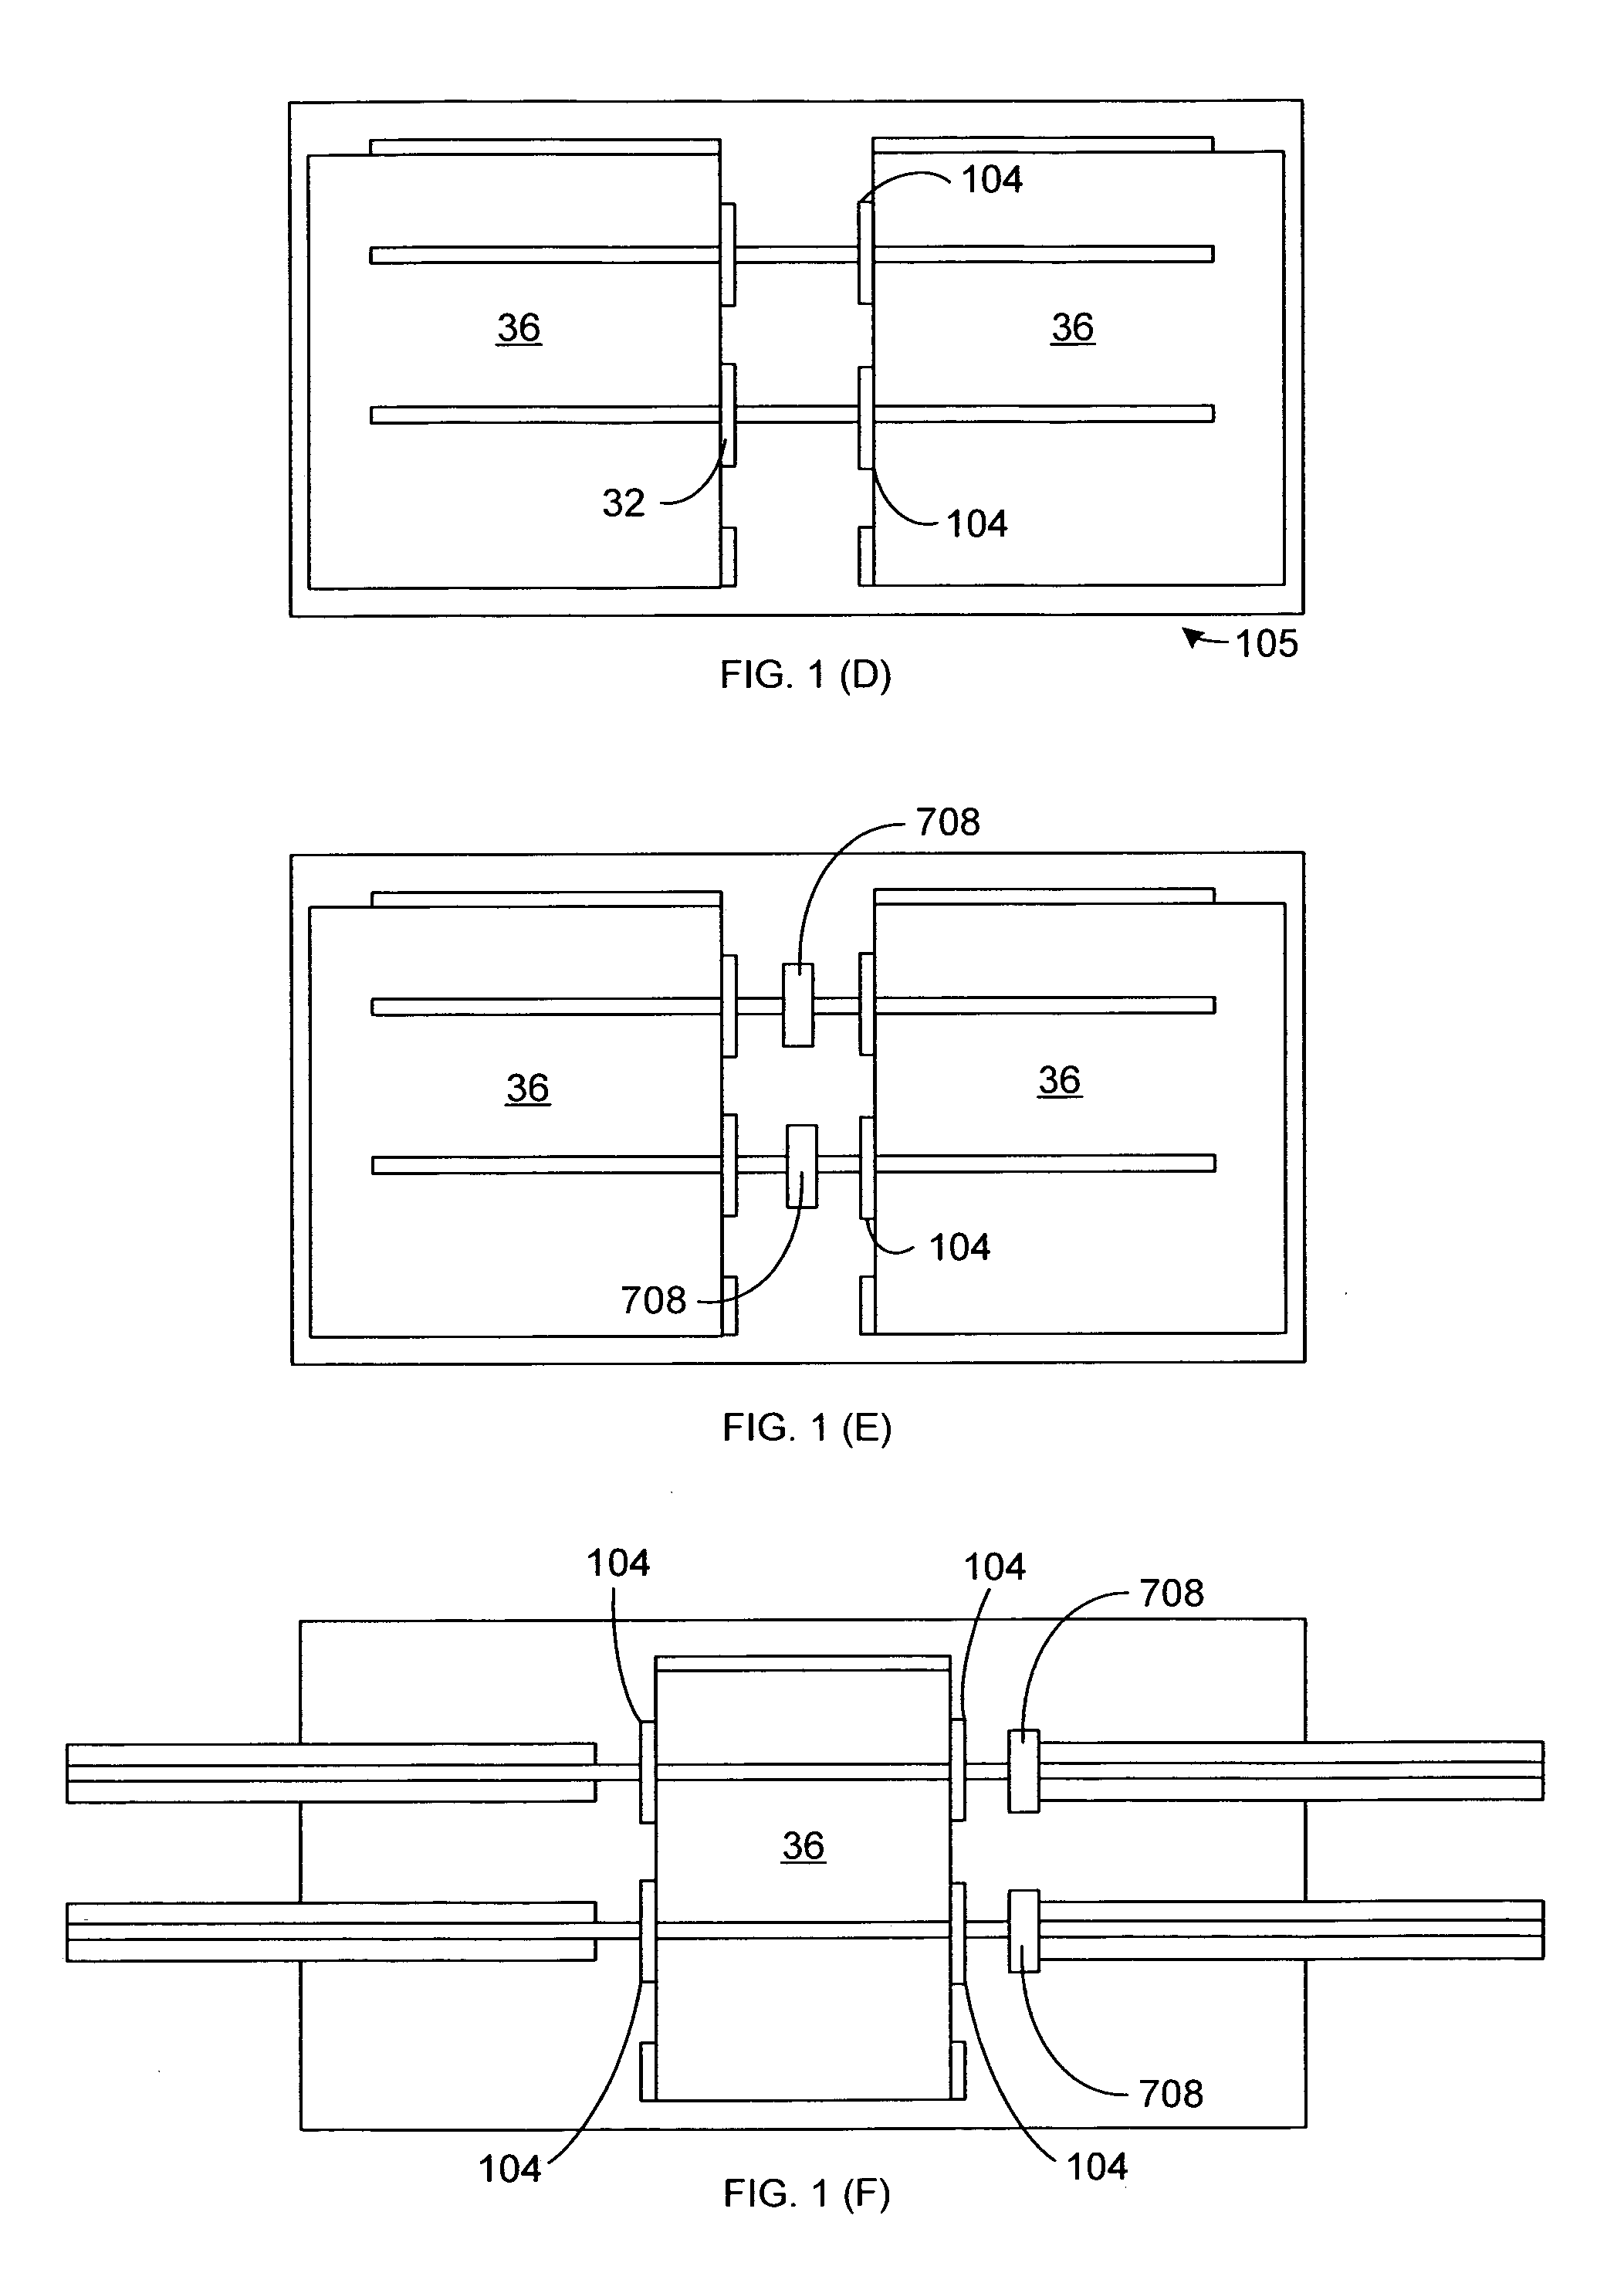 Optical beam transformer module for light coupling between a fiber array and a photonic chip and the method of making the same